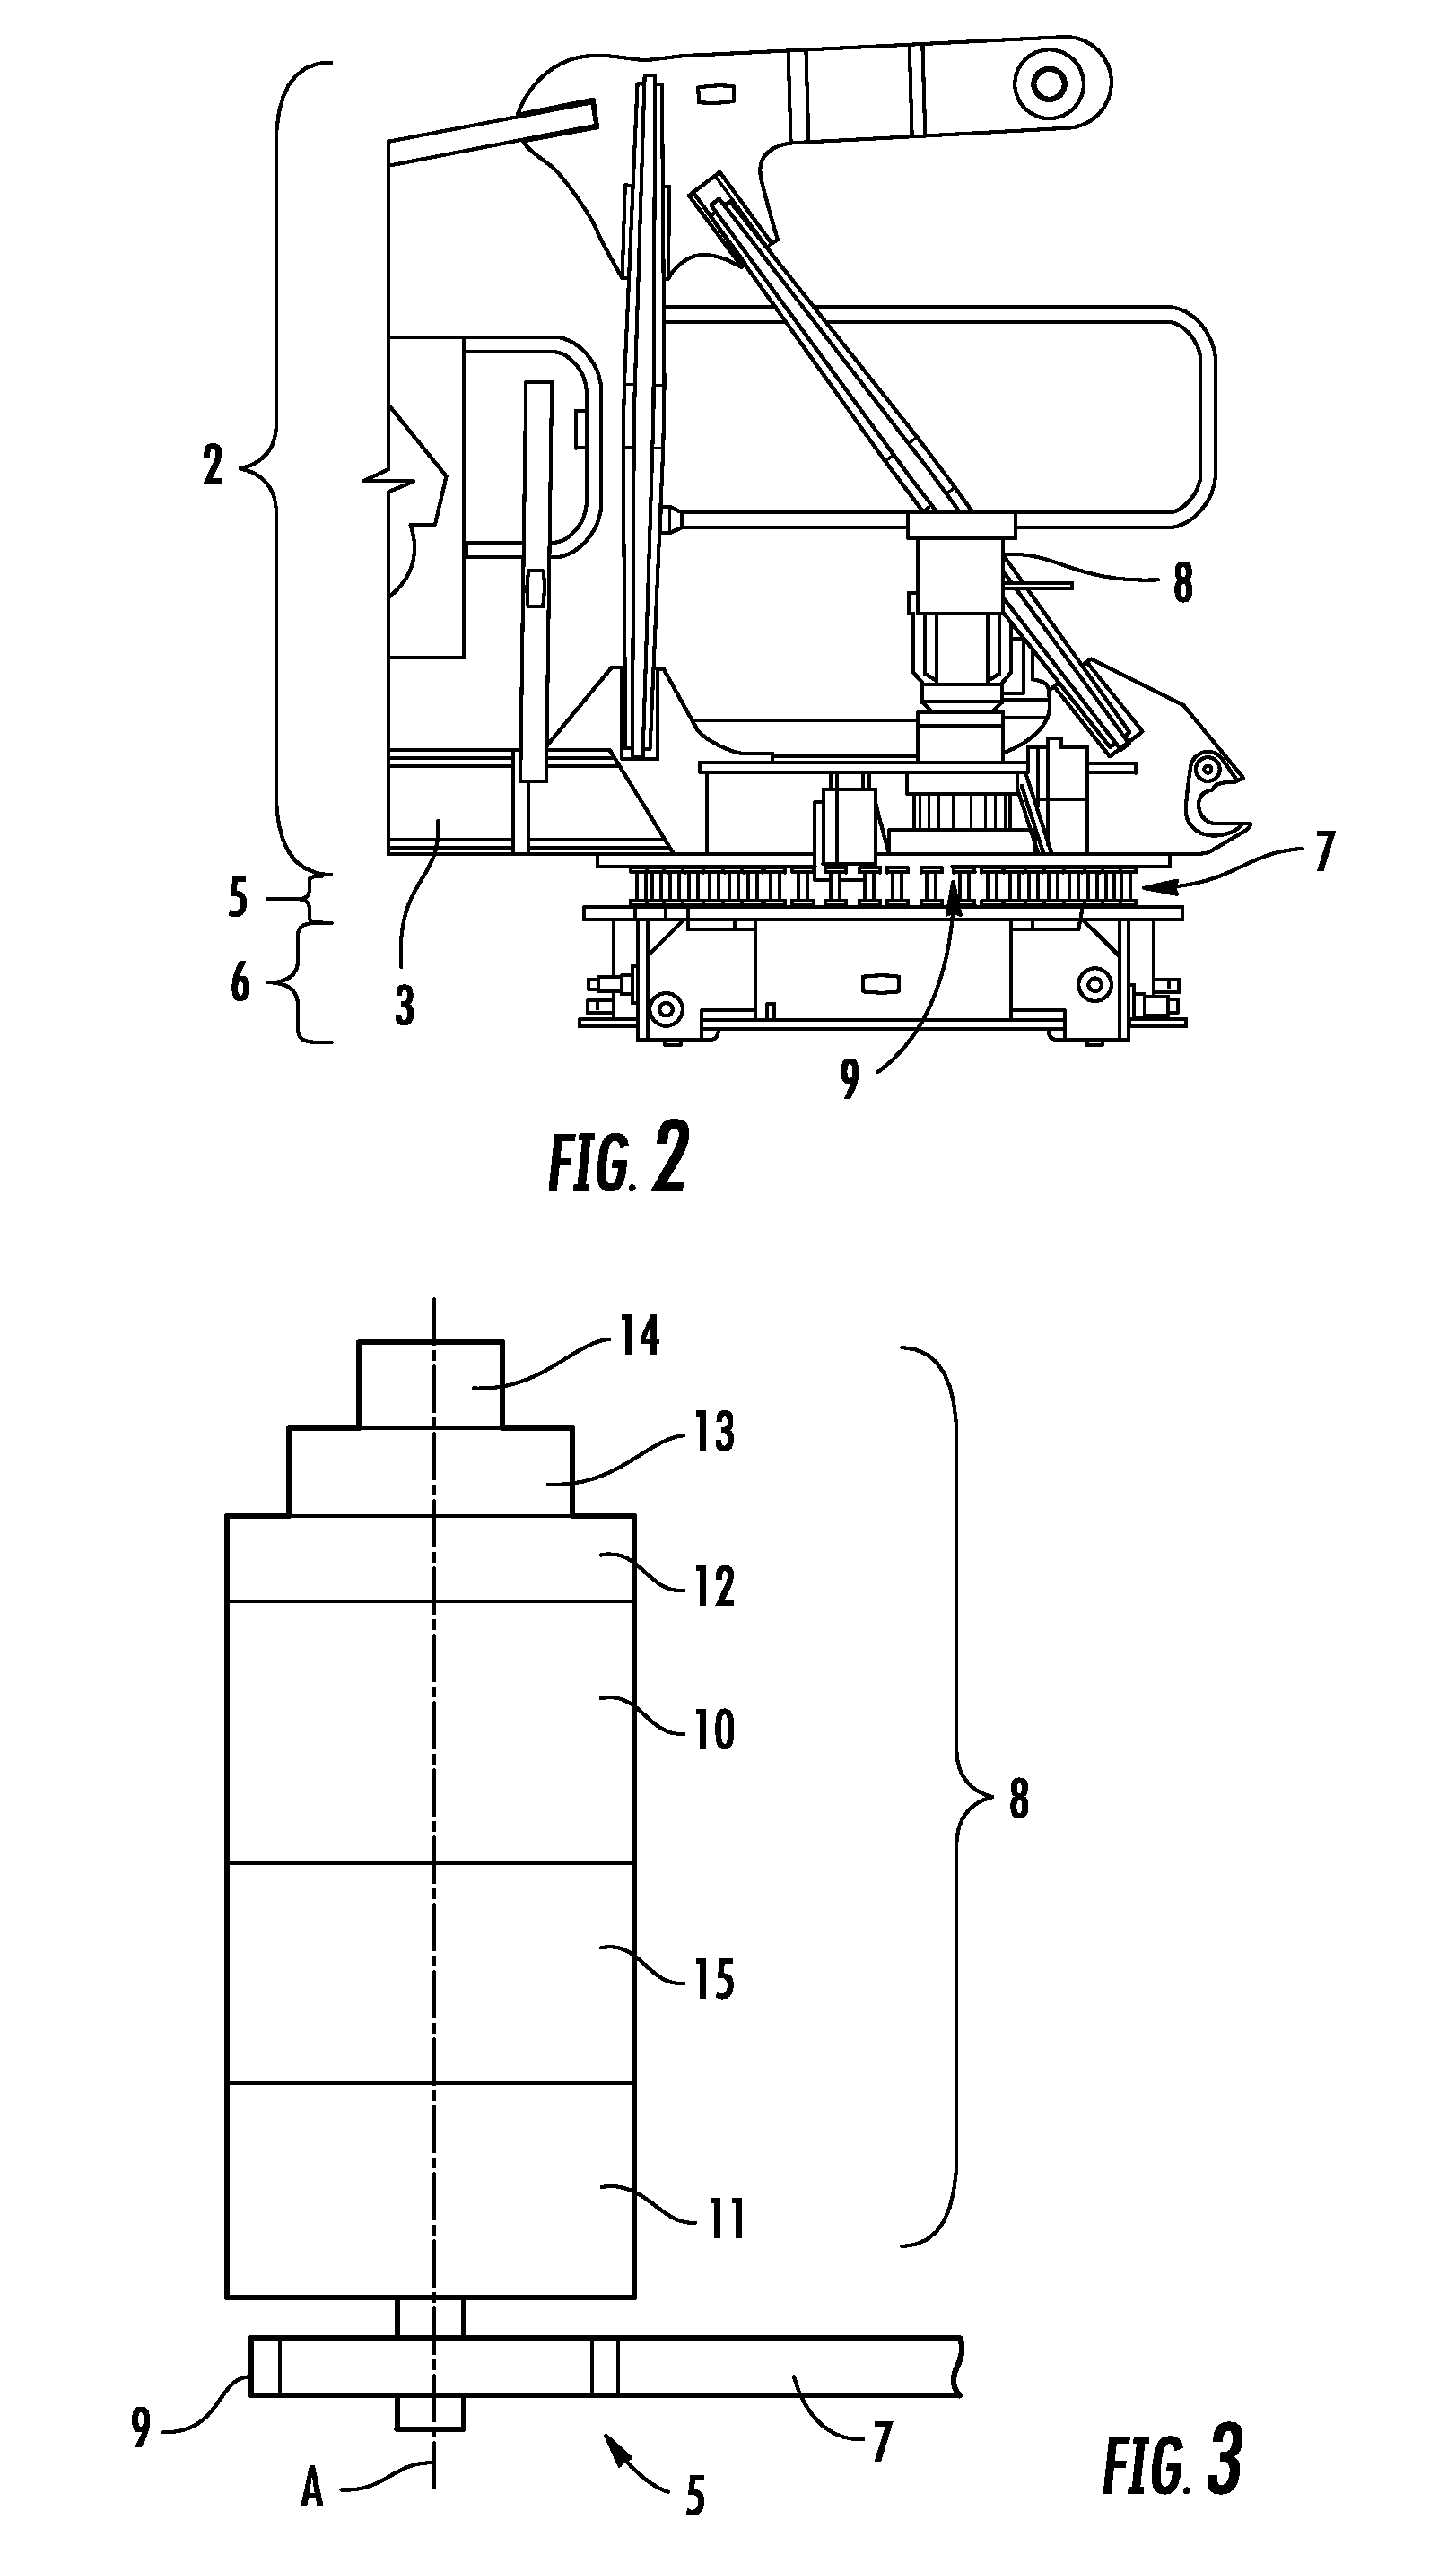 Device for placing a tower crane in weathervaning mode